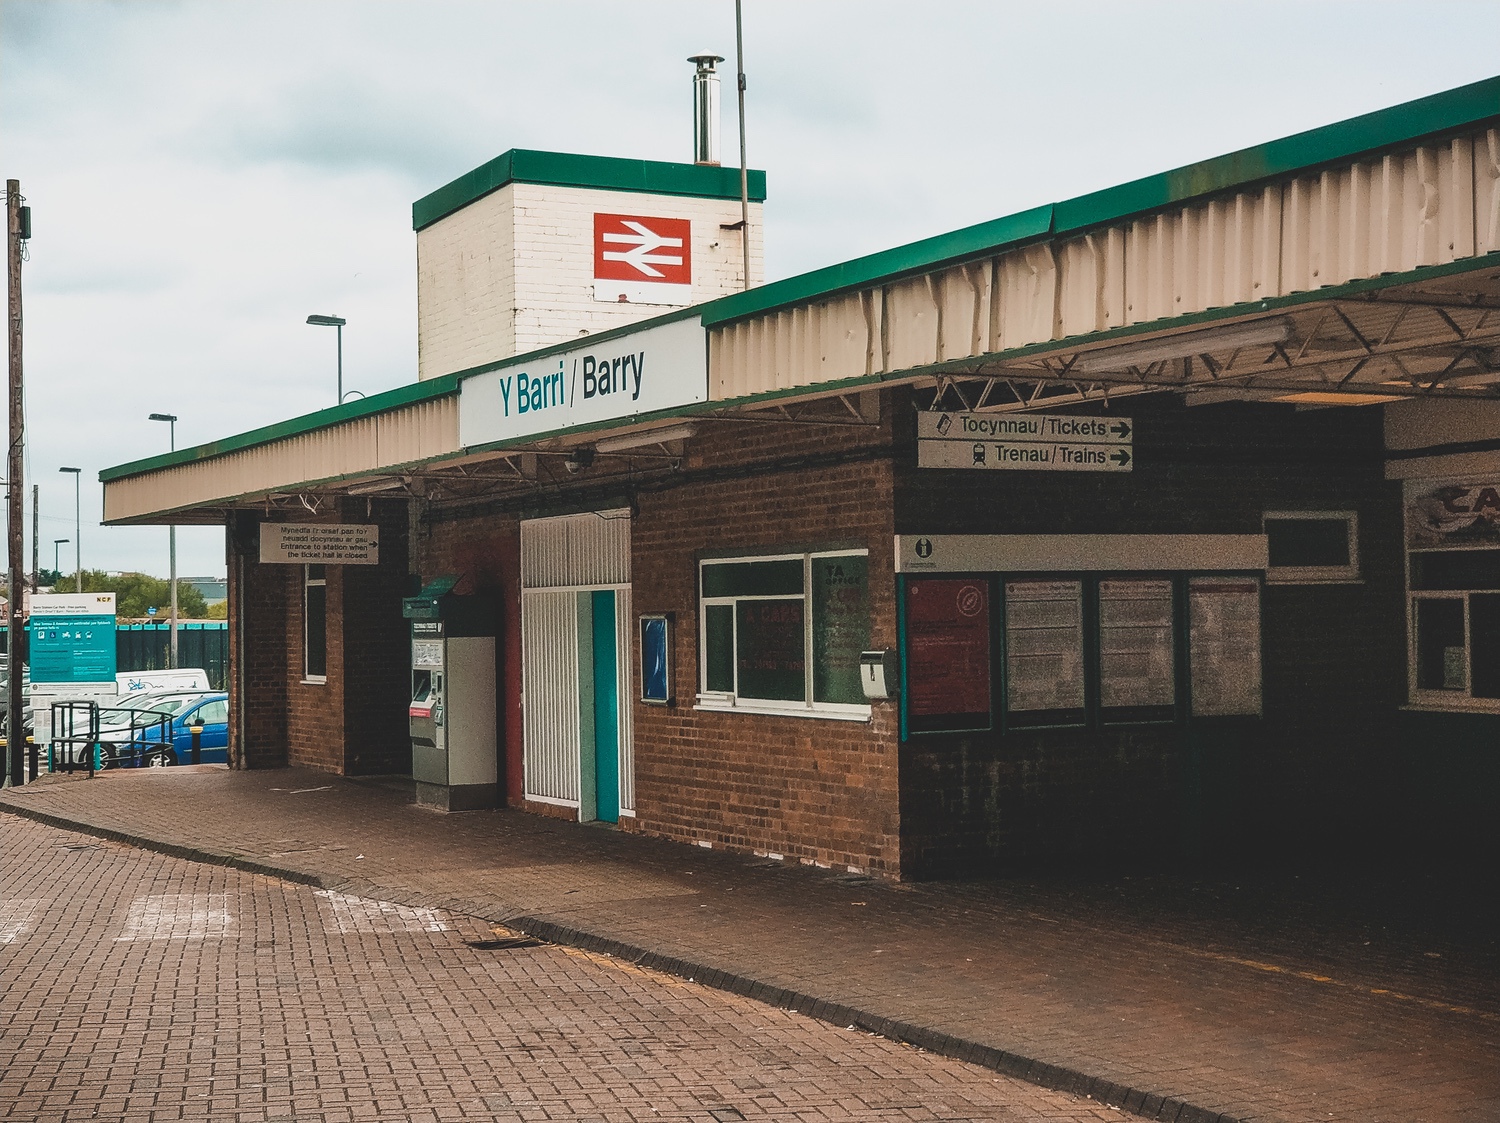 The outside of Barry station